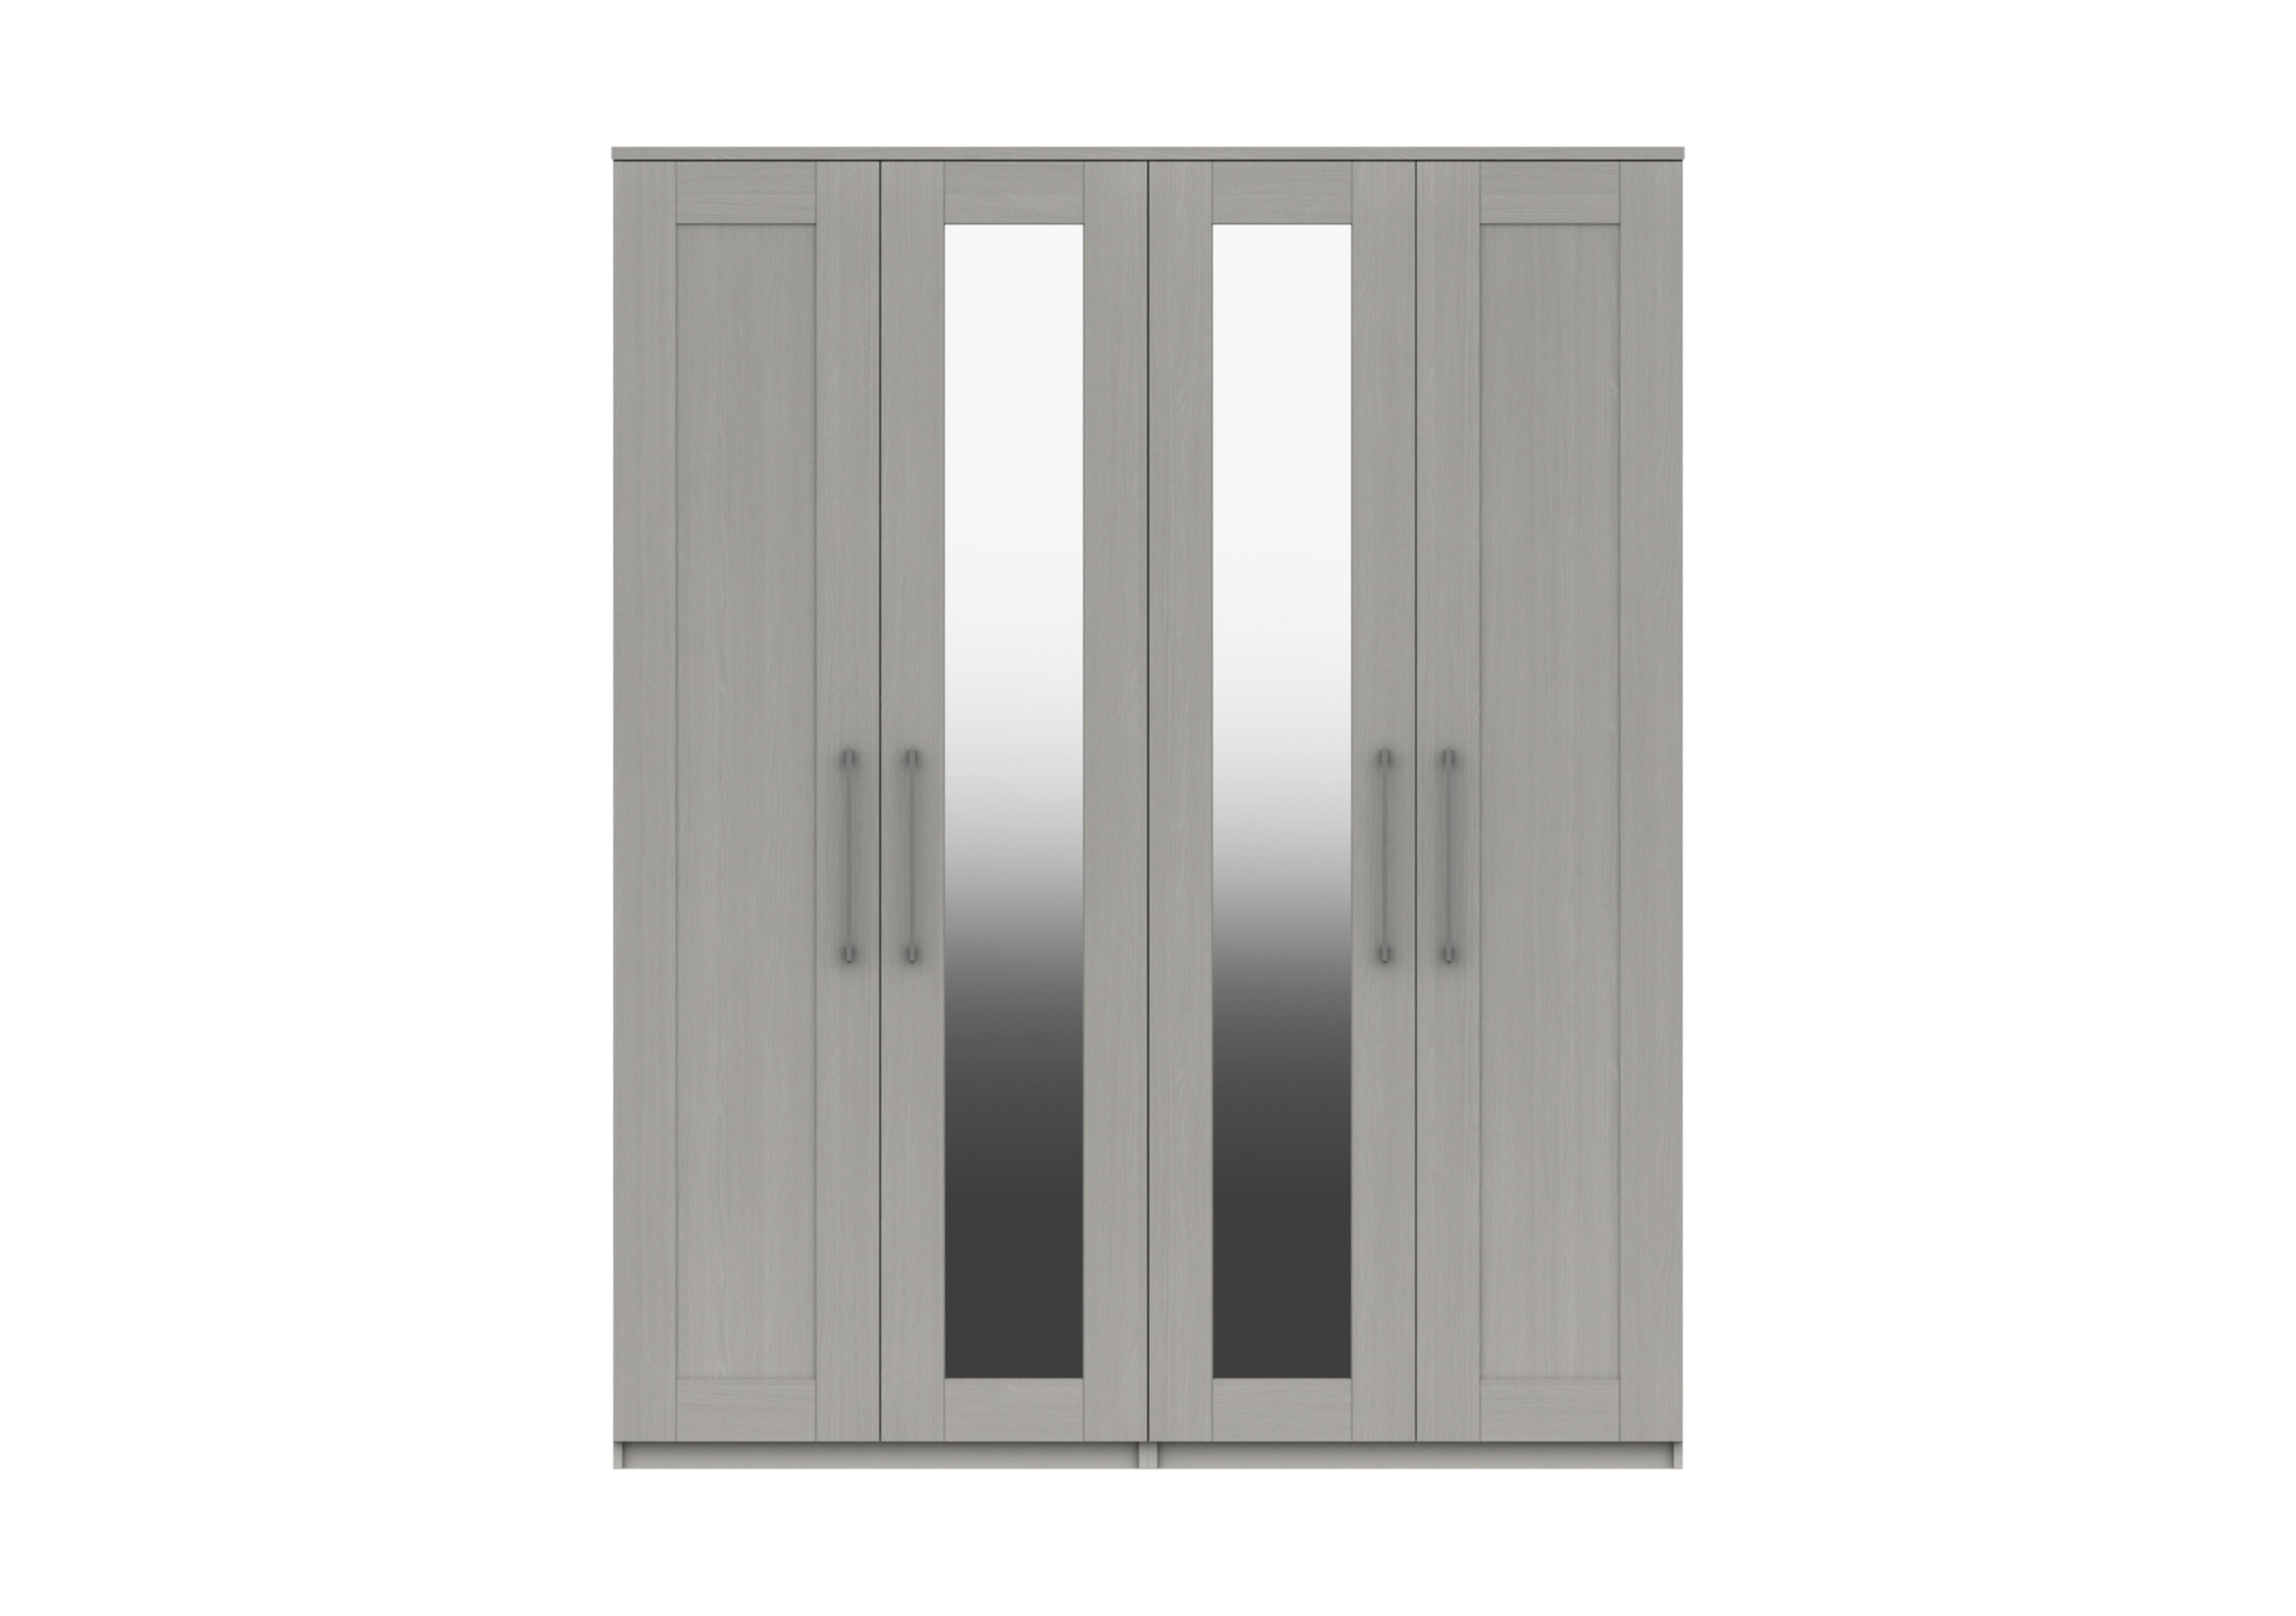 Fenchurch 4 Door Tall Wardrobe with Mirrors in Light Grey on Furniture Village